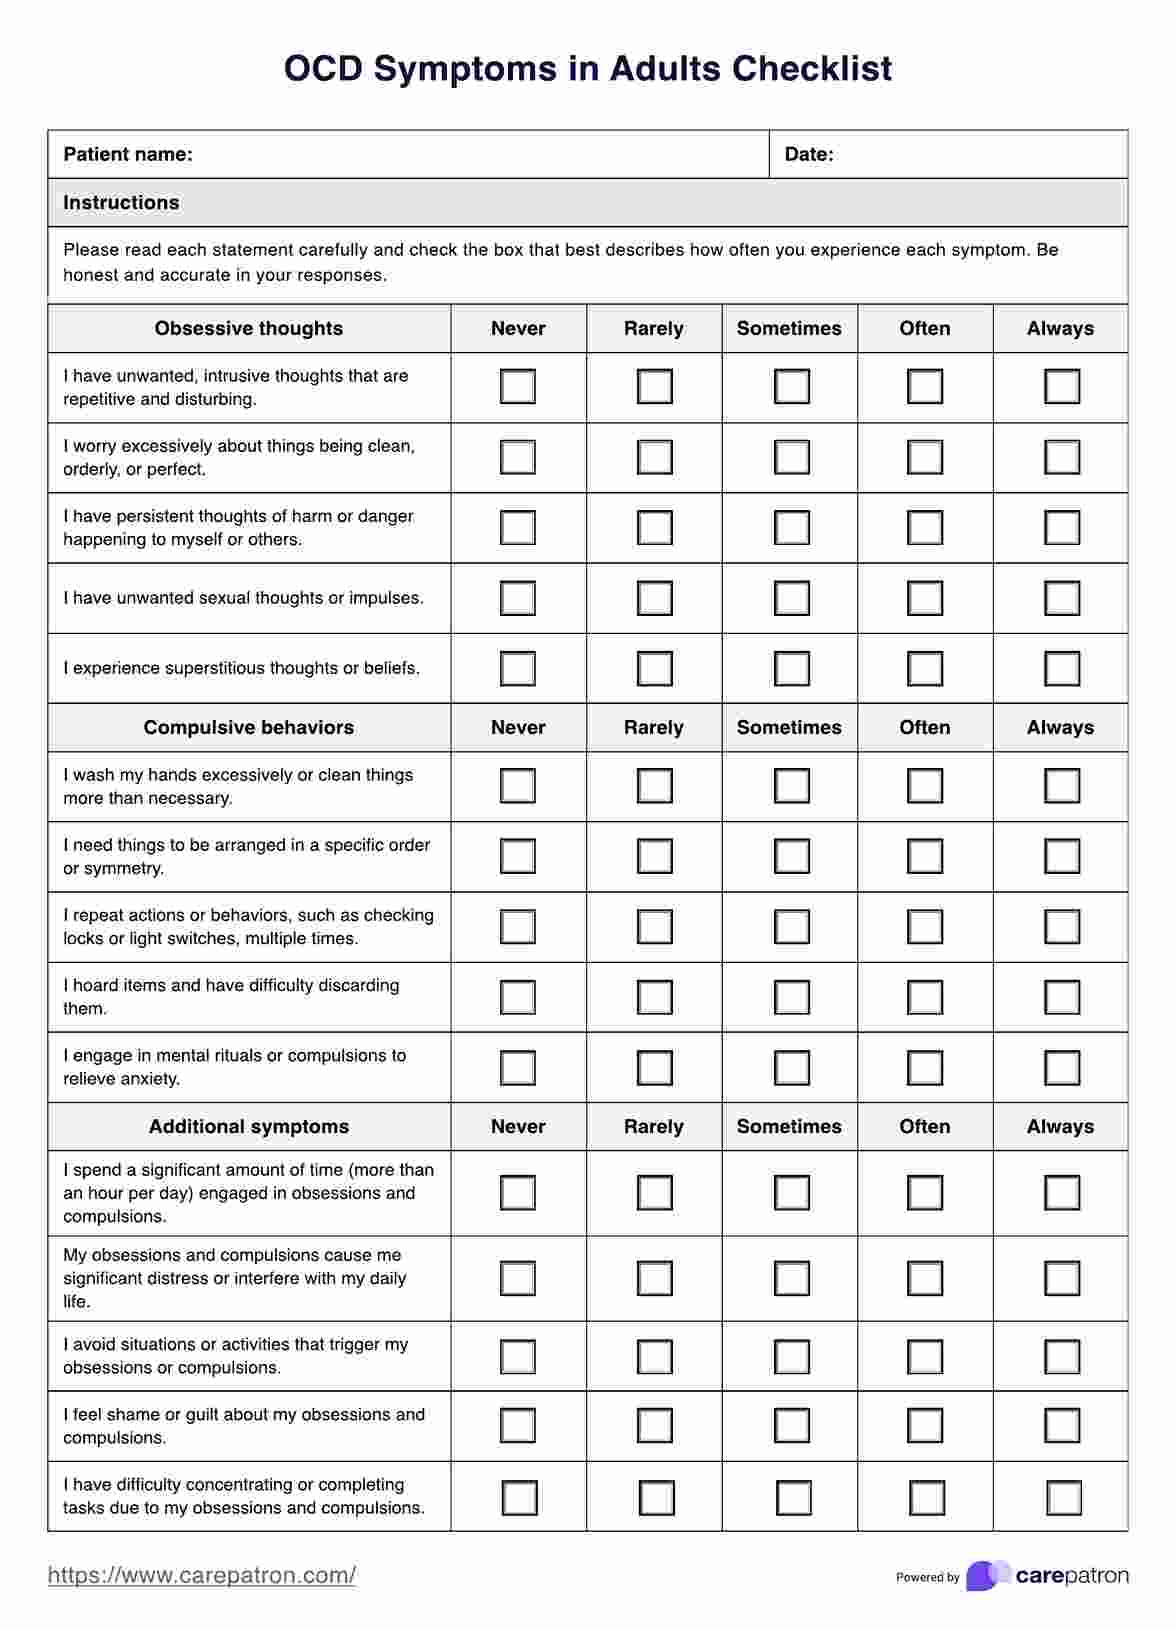 OCD Symptoms In Adults Checklist PDF Example